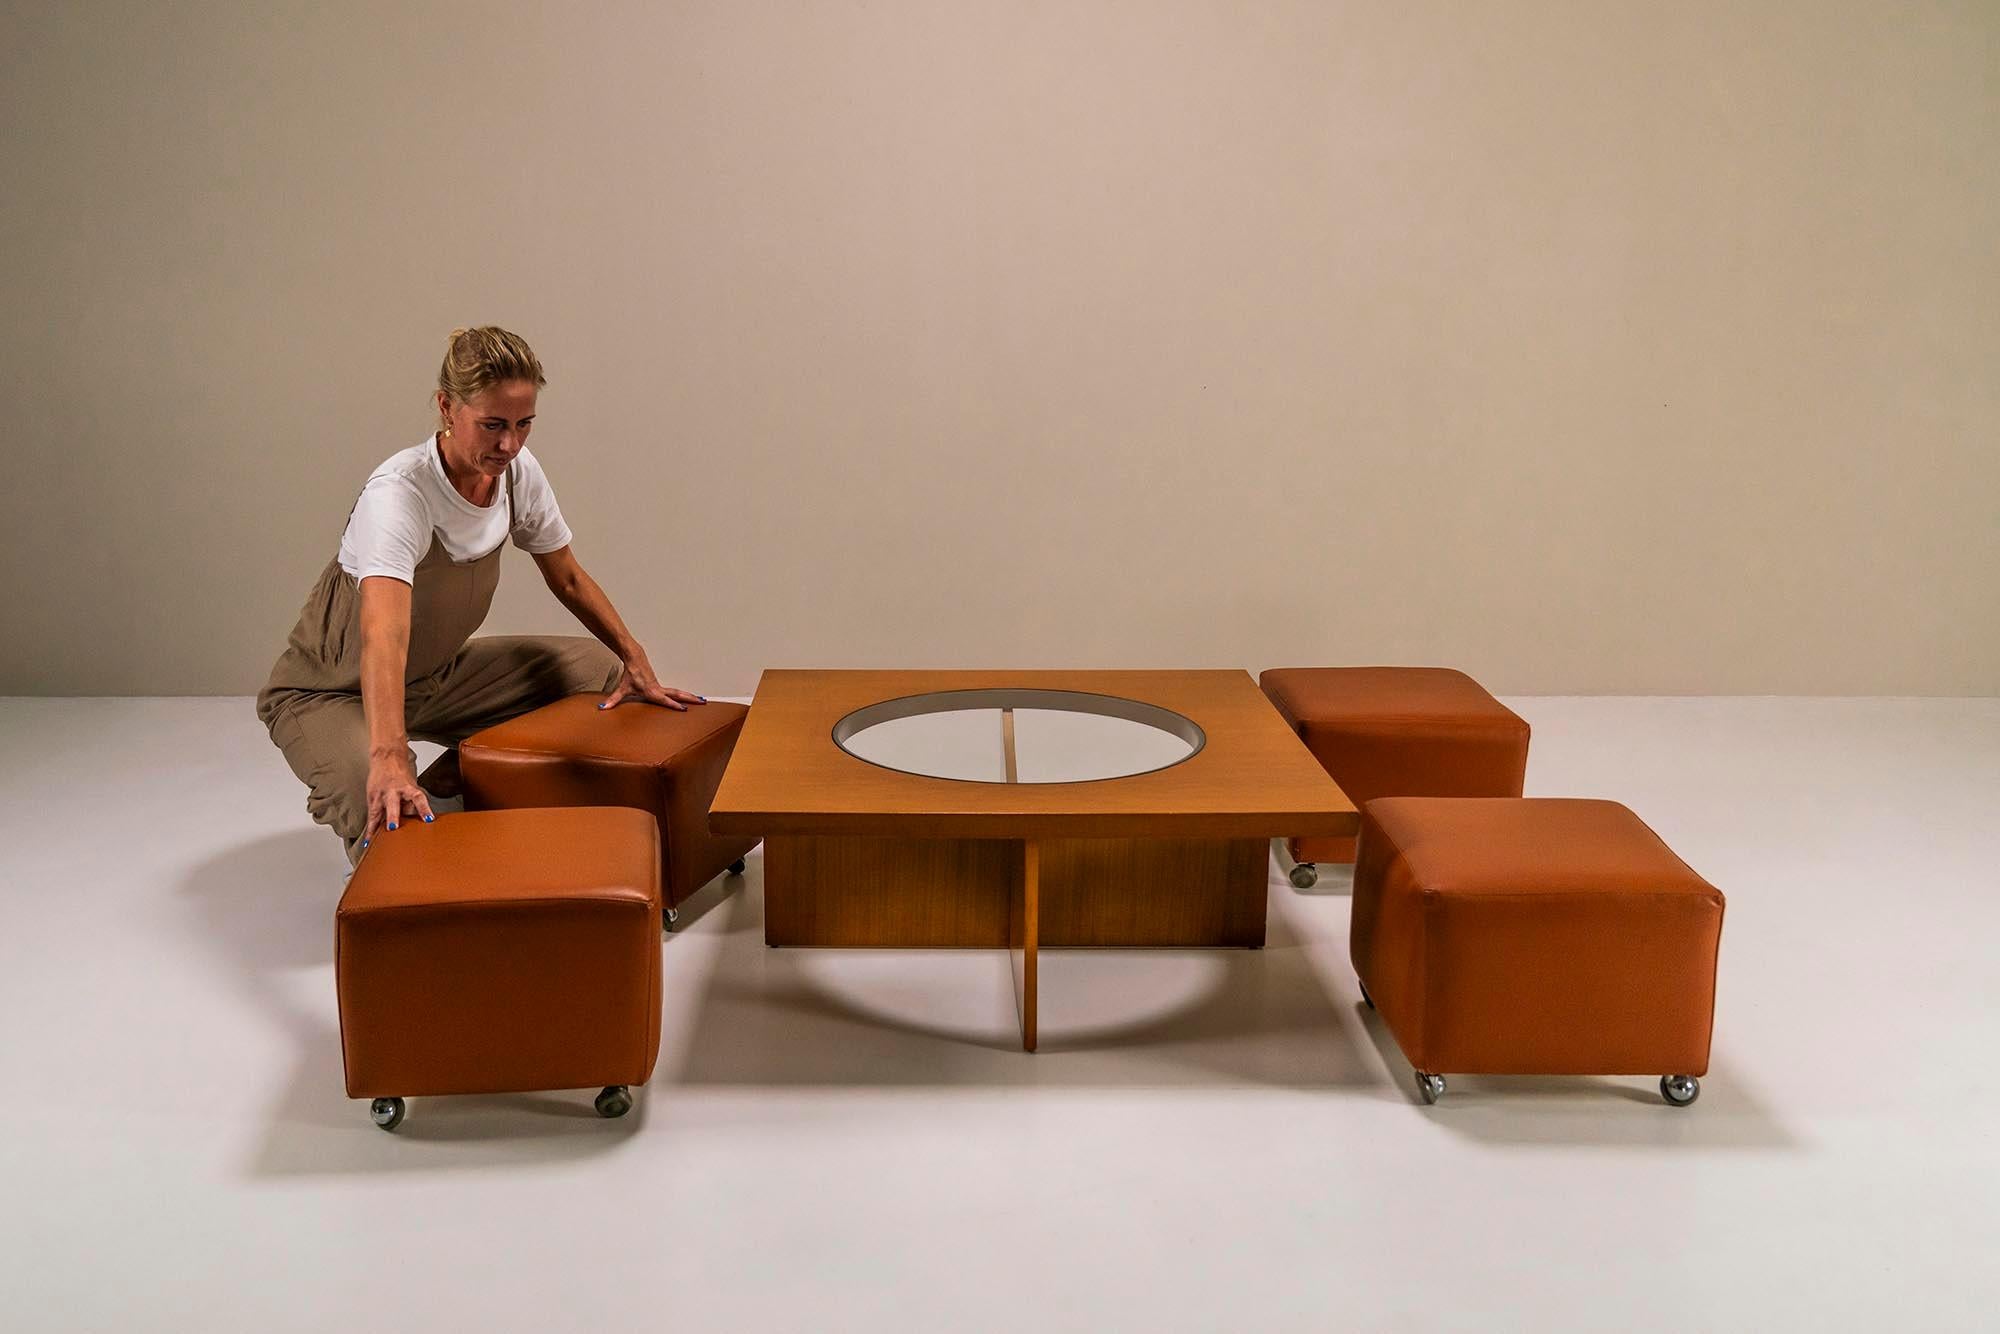 Mid-Century Modern Coffee Table In Cherry Wood With Four Faux Mobile Poufs, Italy 1970's For Sale